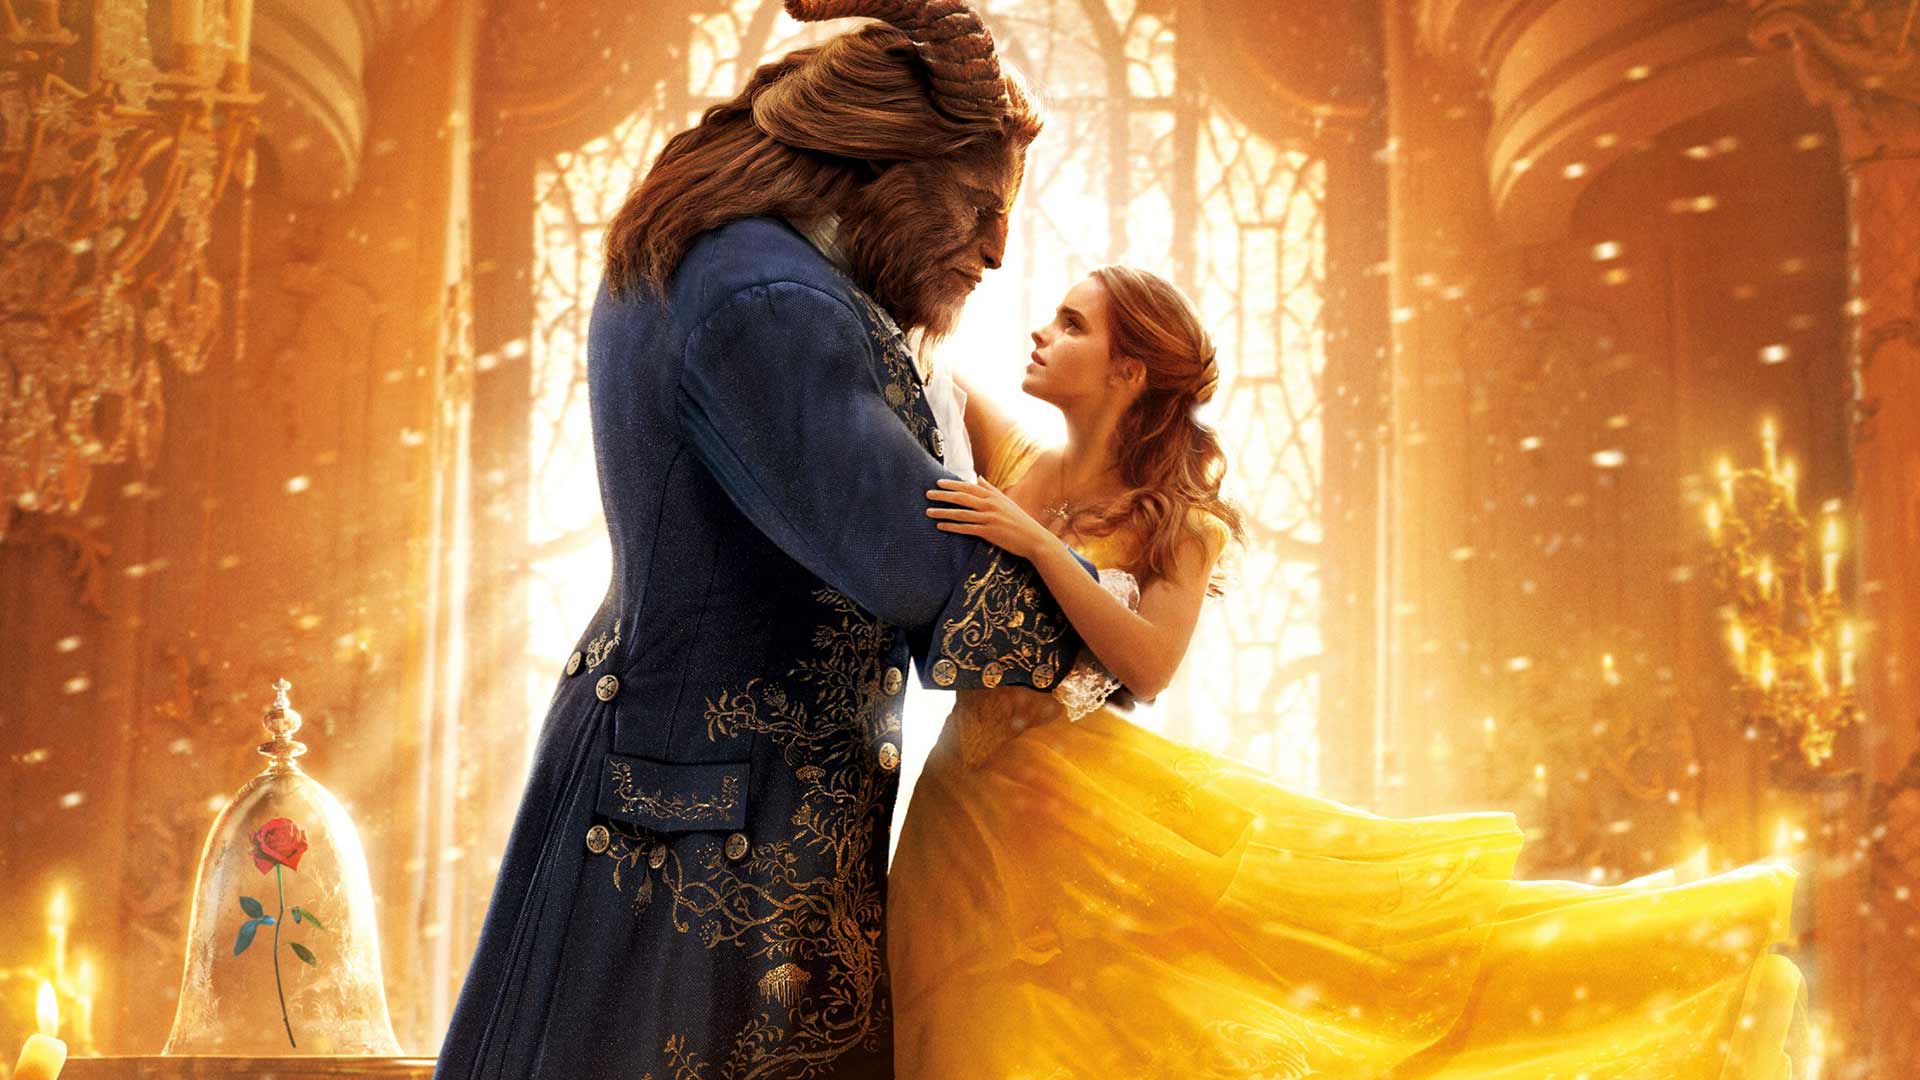 Disney's Beauty and the Beast Live Action + Animated Collection